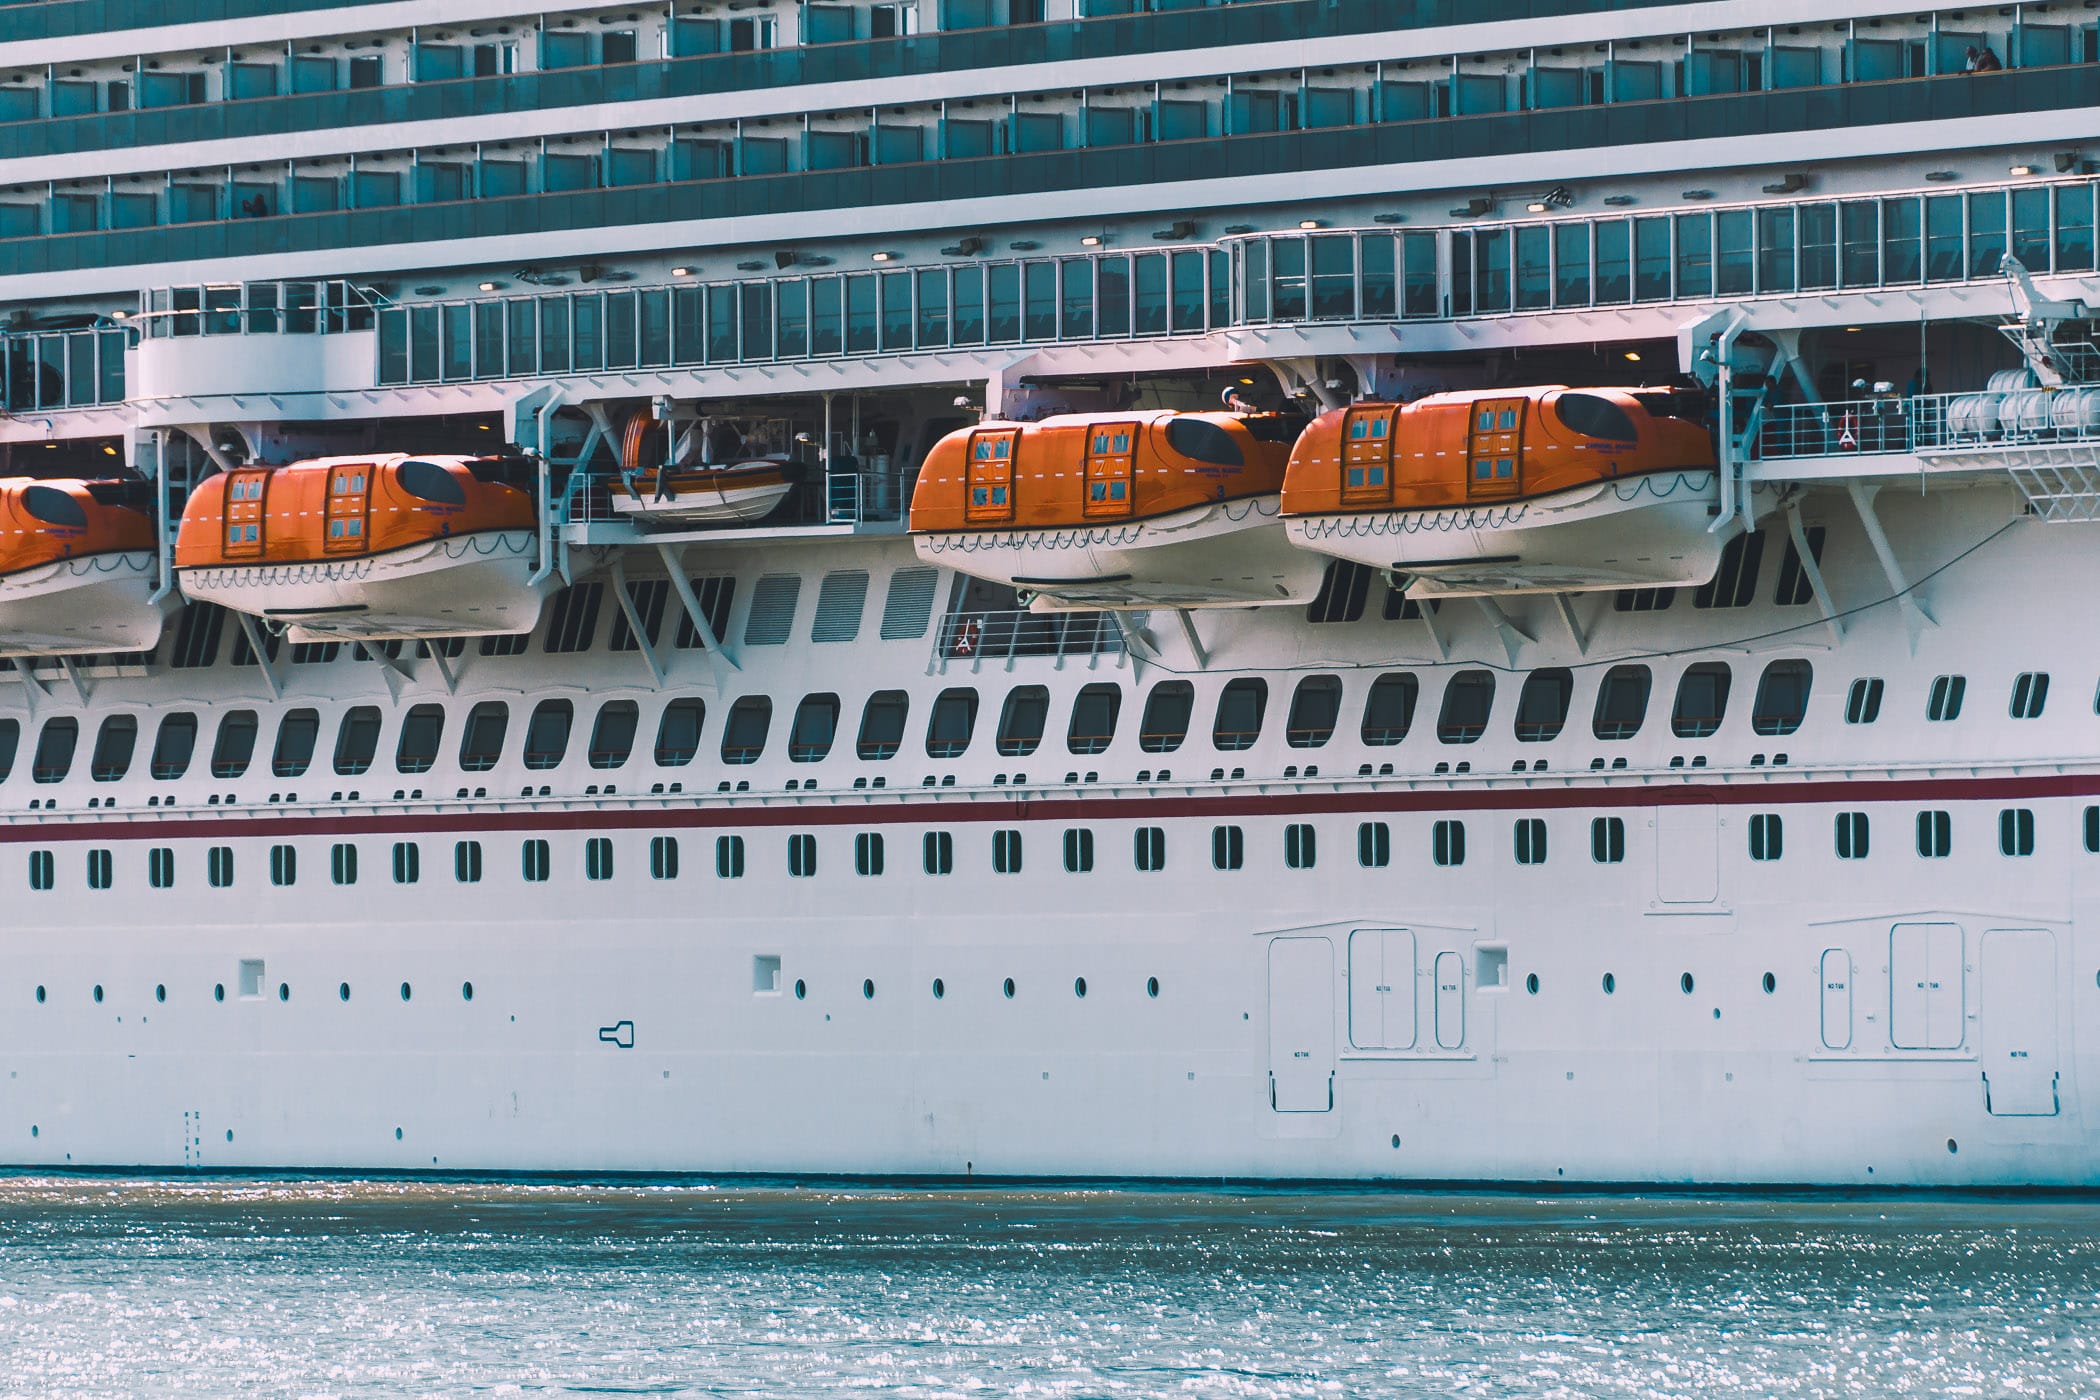 Exterior detail of the Carnival Magic as she sets sail from the Port of Galveston, Texas.